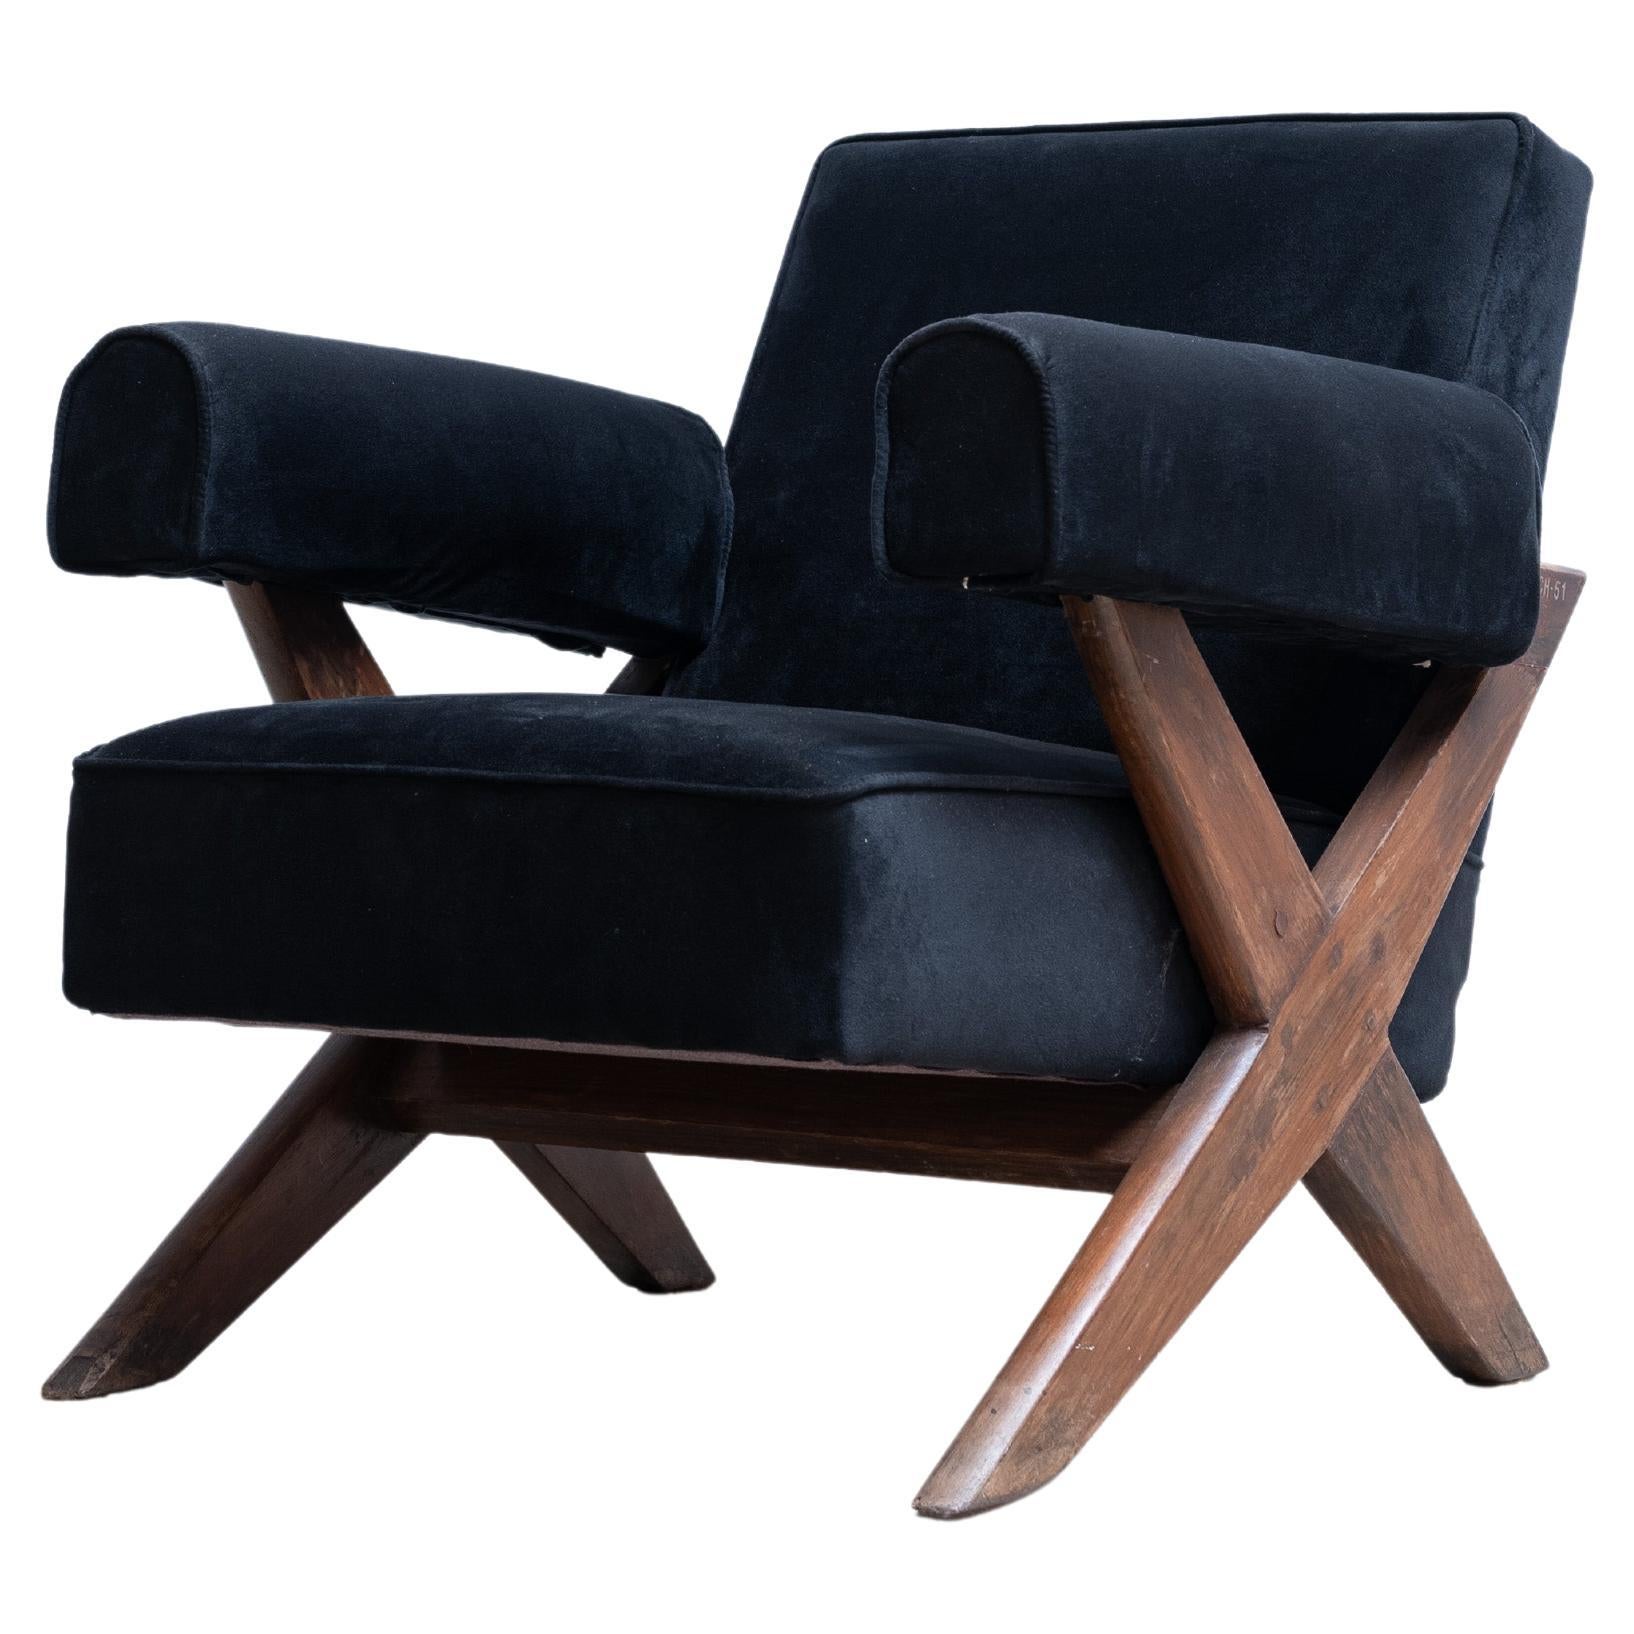 Pierre Jeanneret X-Leg Upholstered Lounge Chair, Circa 1960, Chandigarh, India For Sale